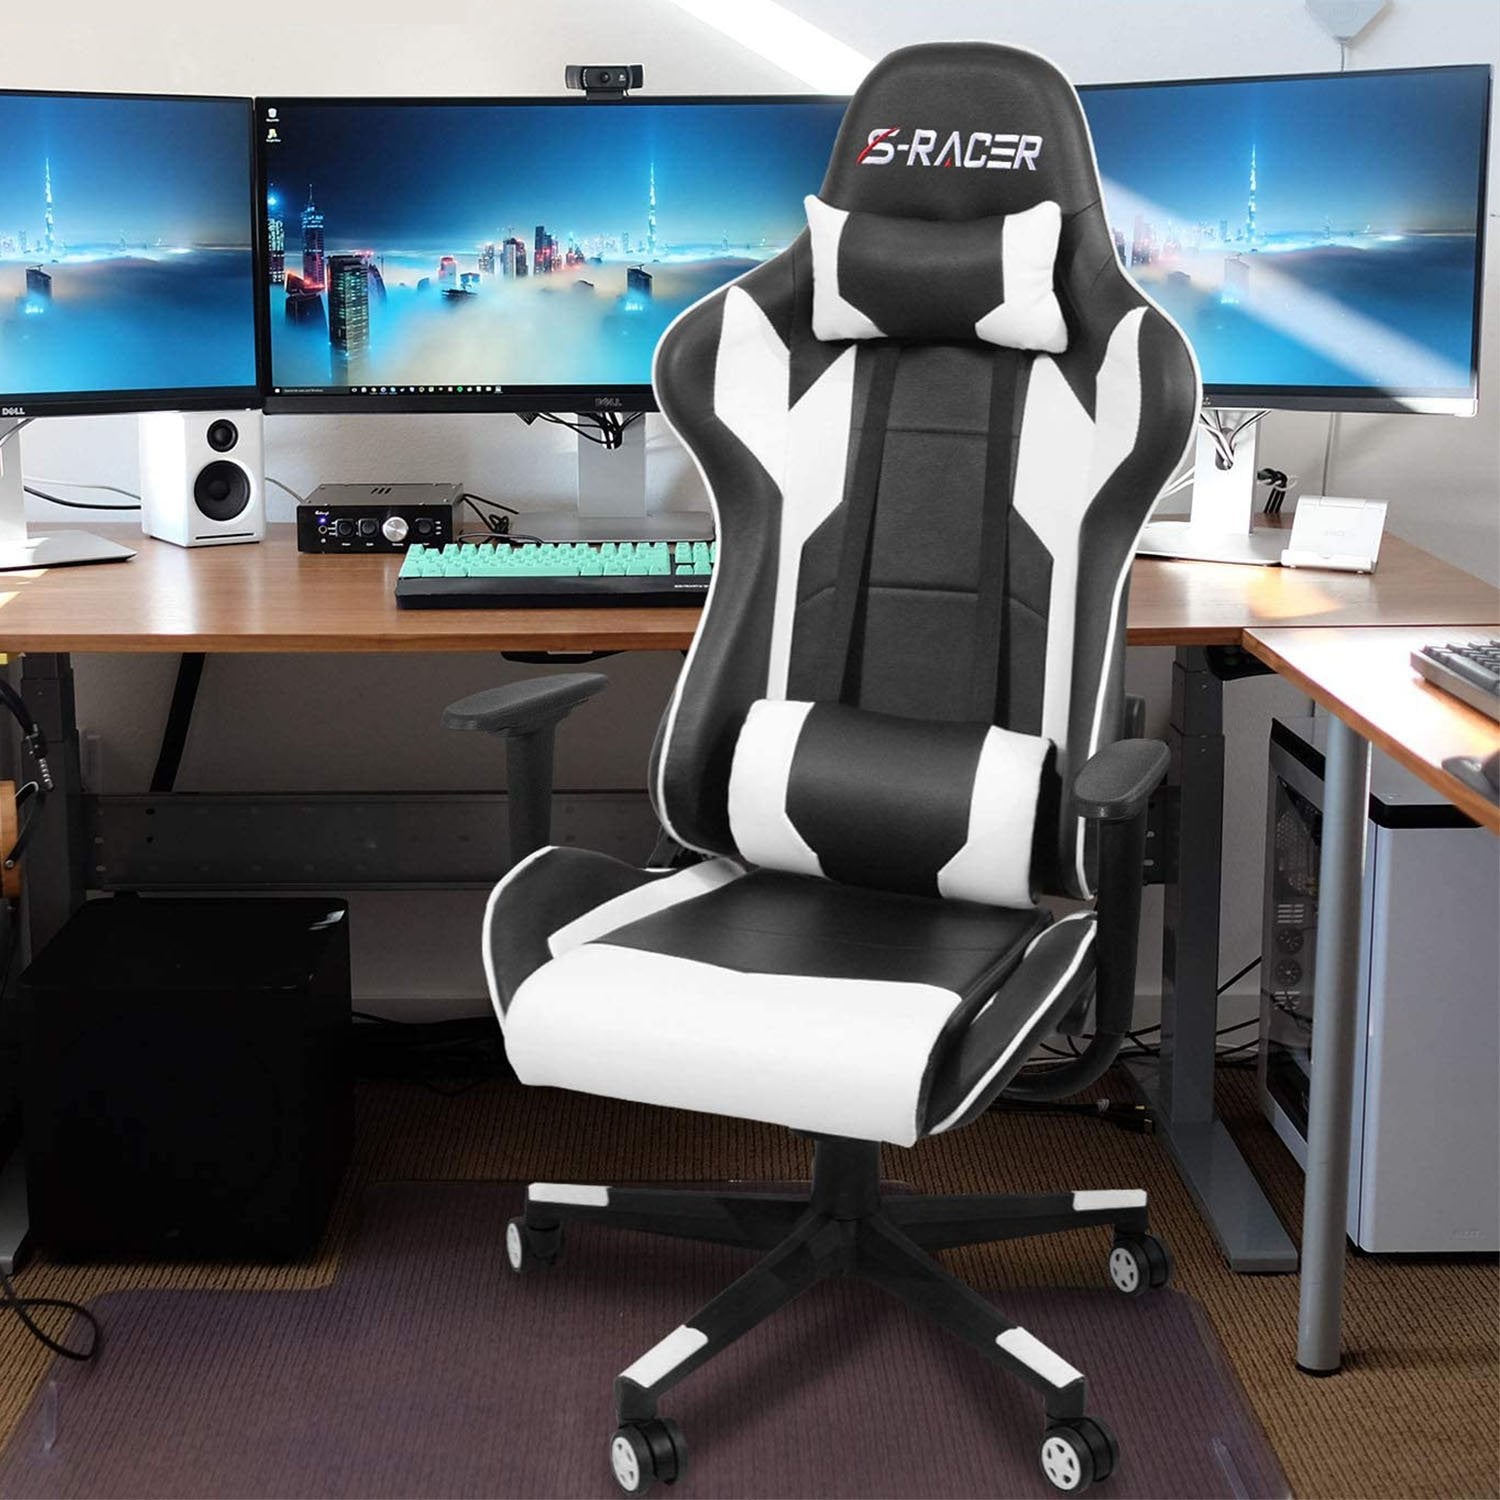 Homall Gaming Chair Sracer Racing Chair Computer Desk Chair Pu Leather Executive Ergonomic 